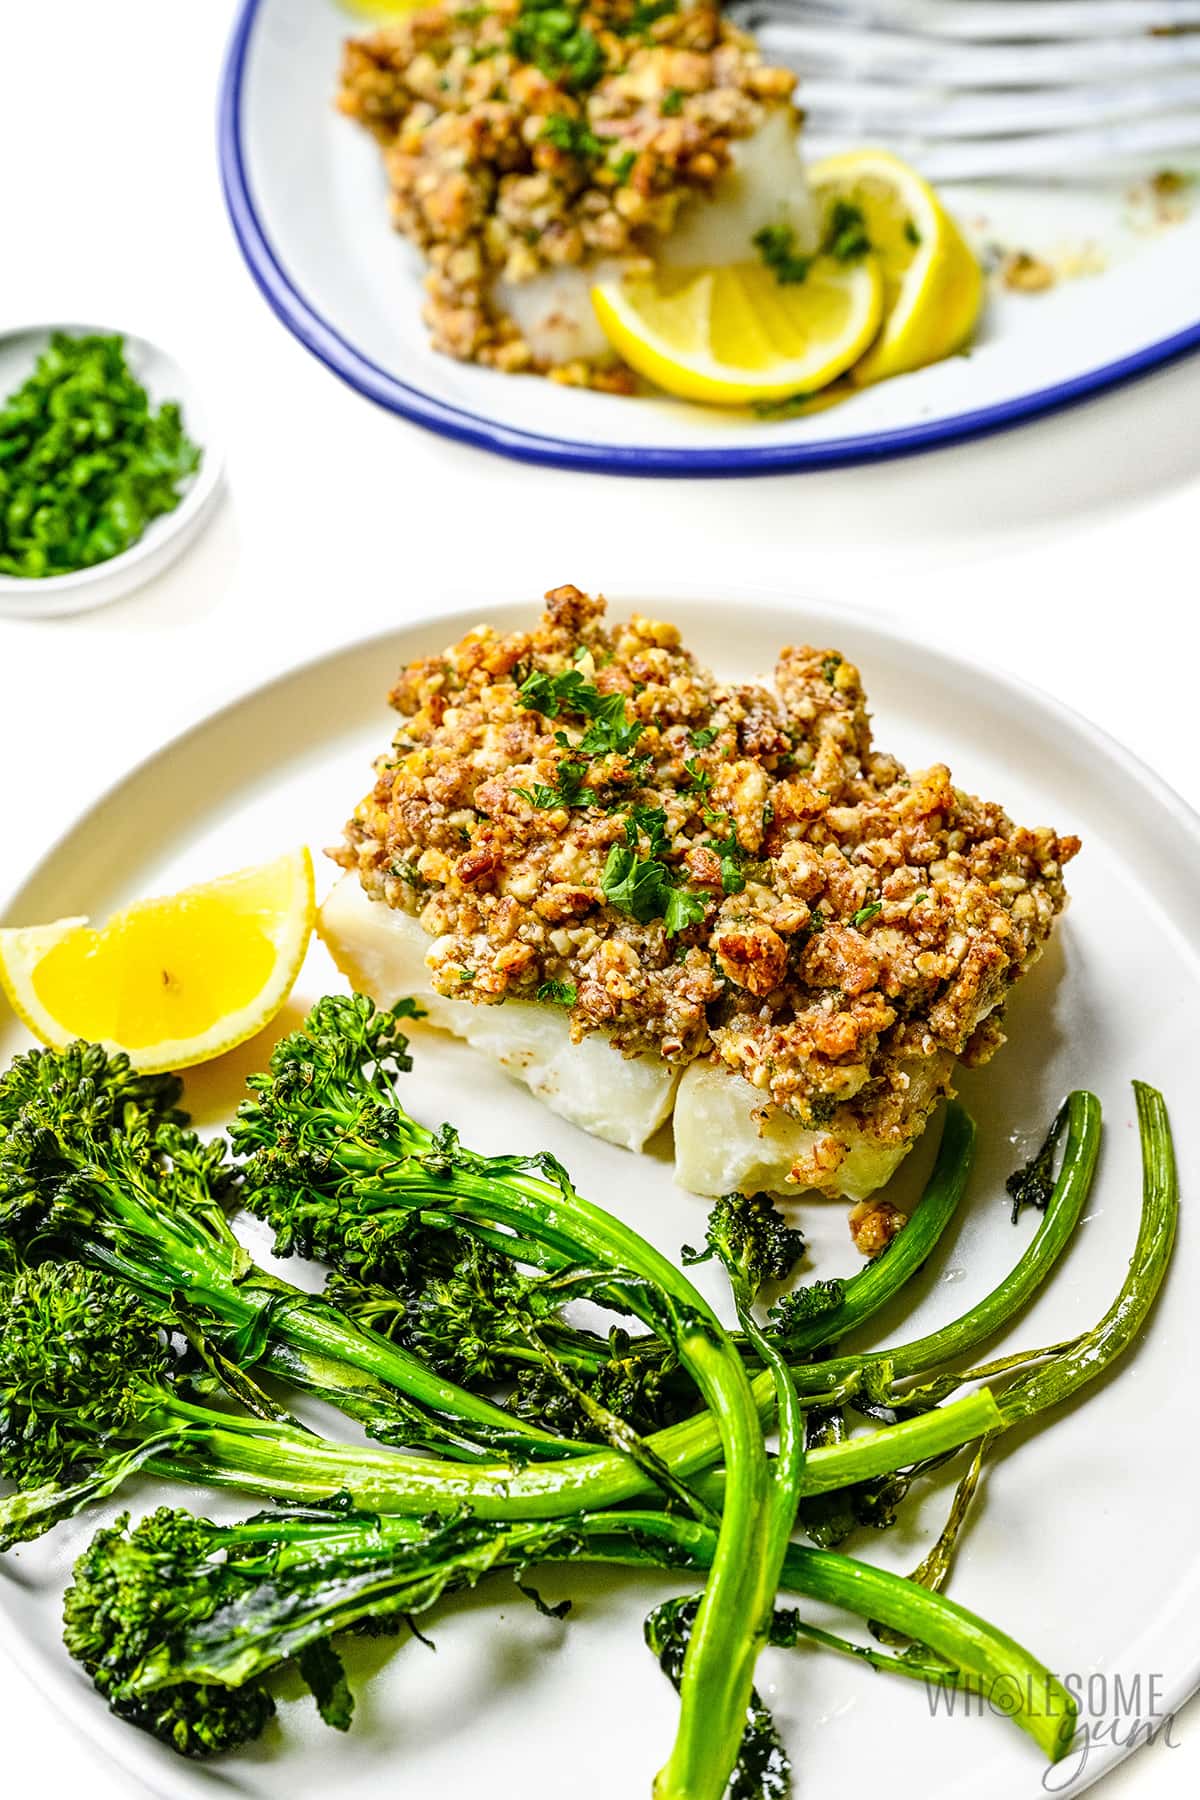 Baked haddock on a plate with broccolini and lemon slices.